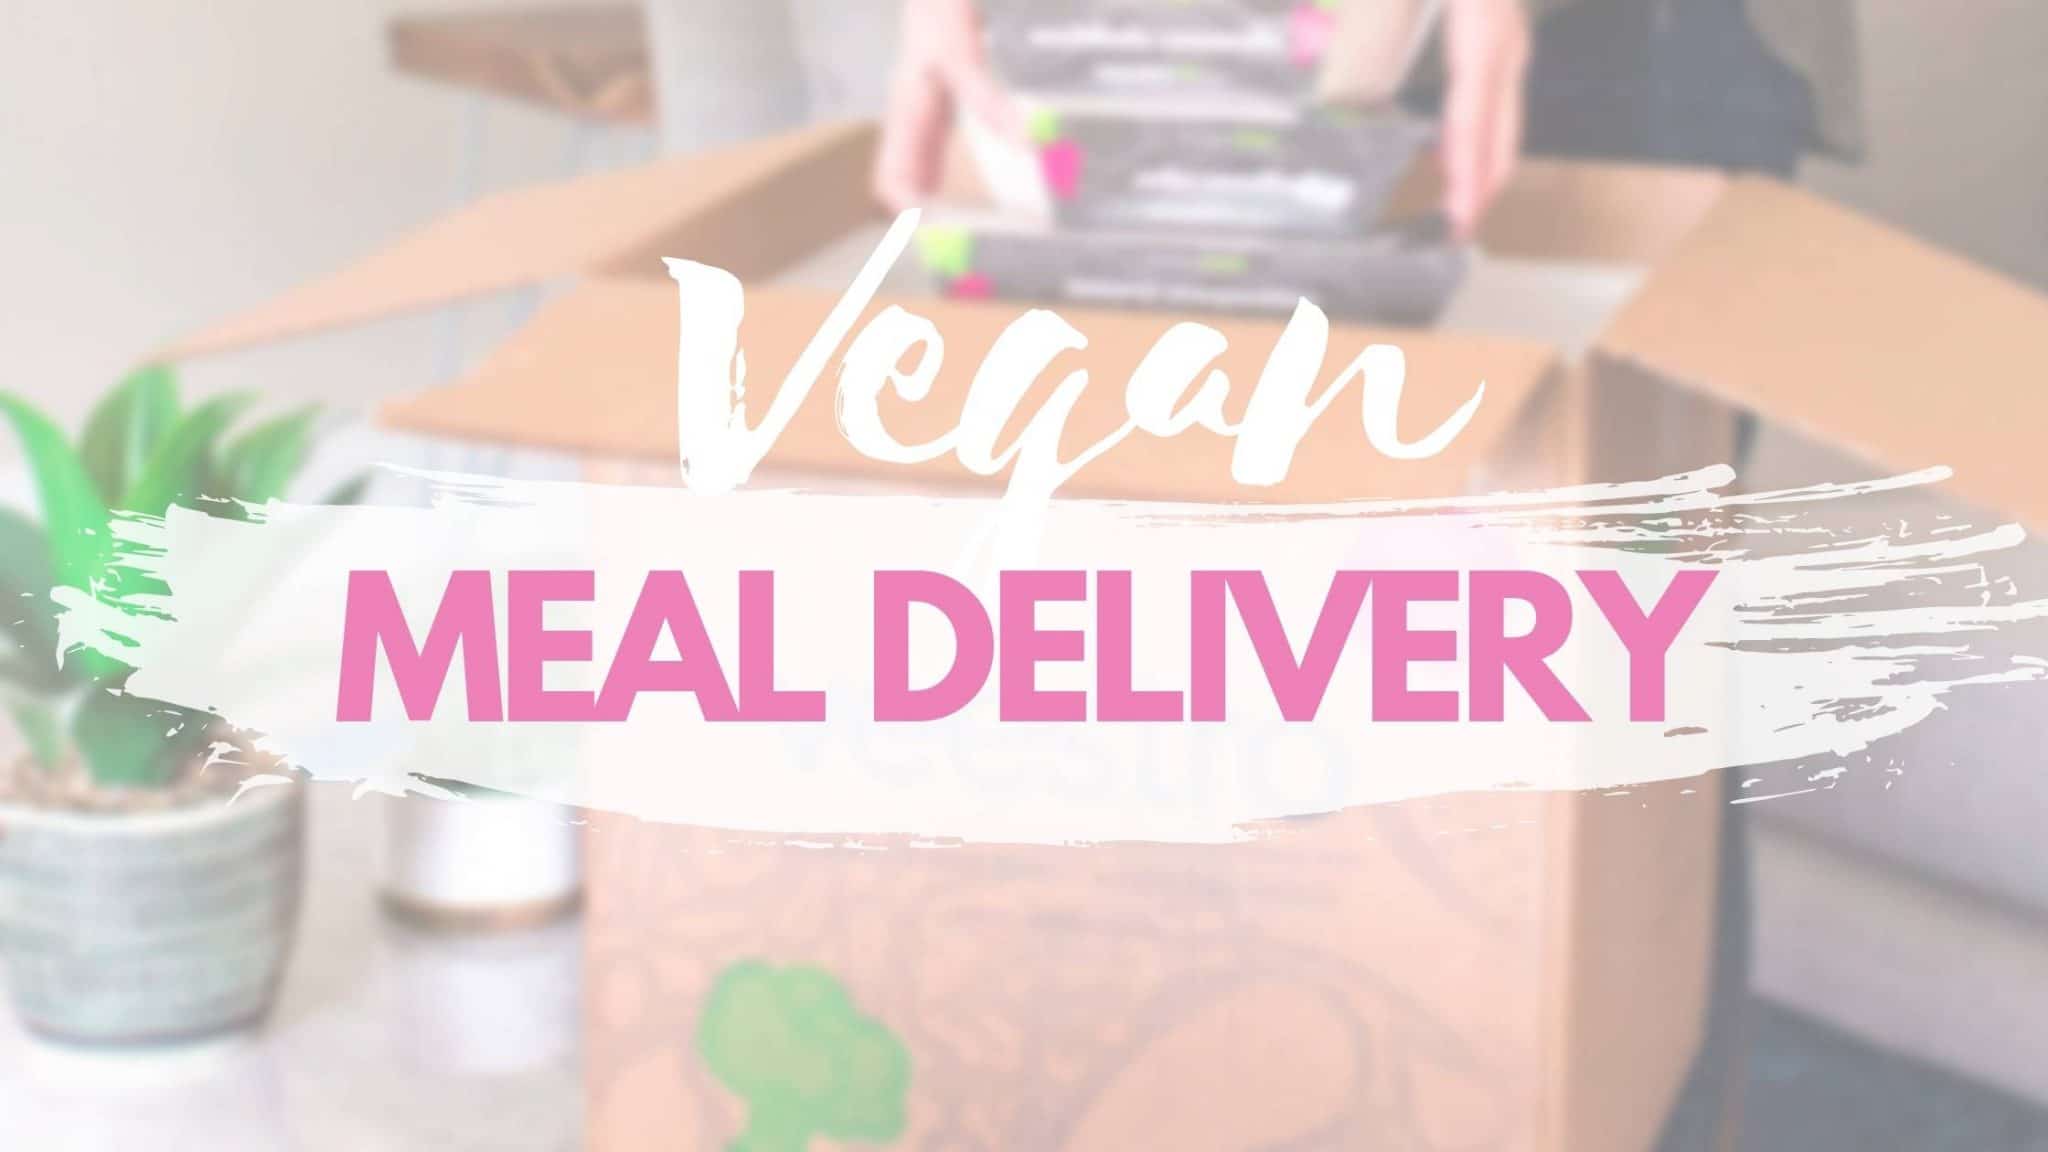 Vegan Meal Delivery Services and Meal Kits